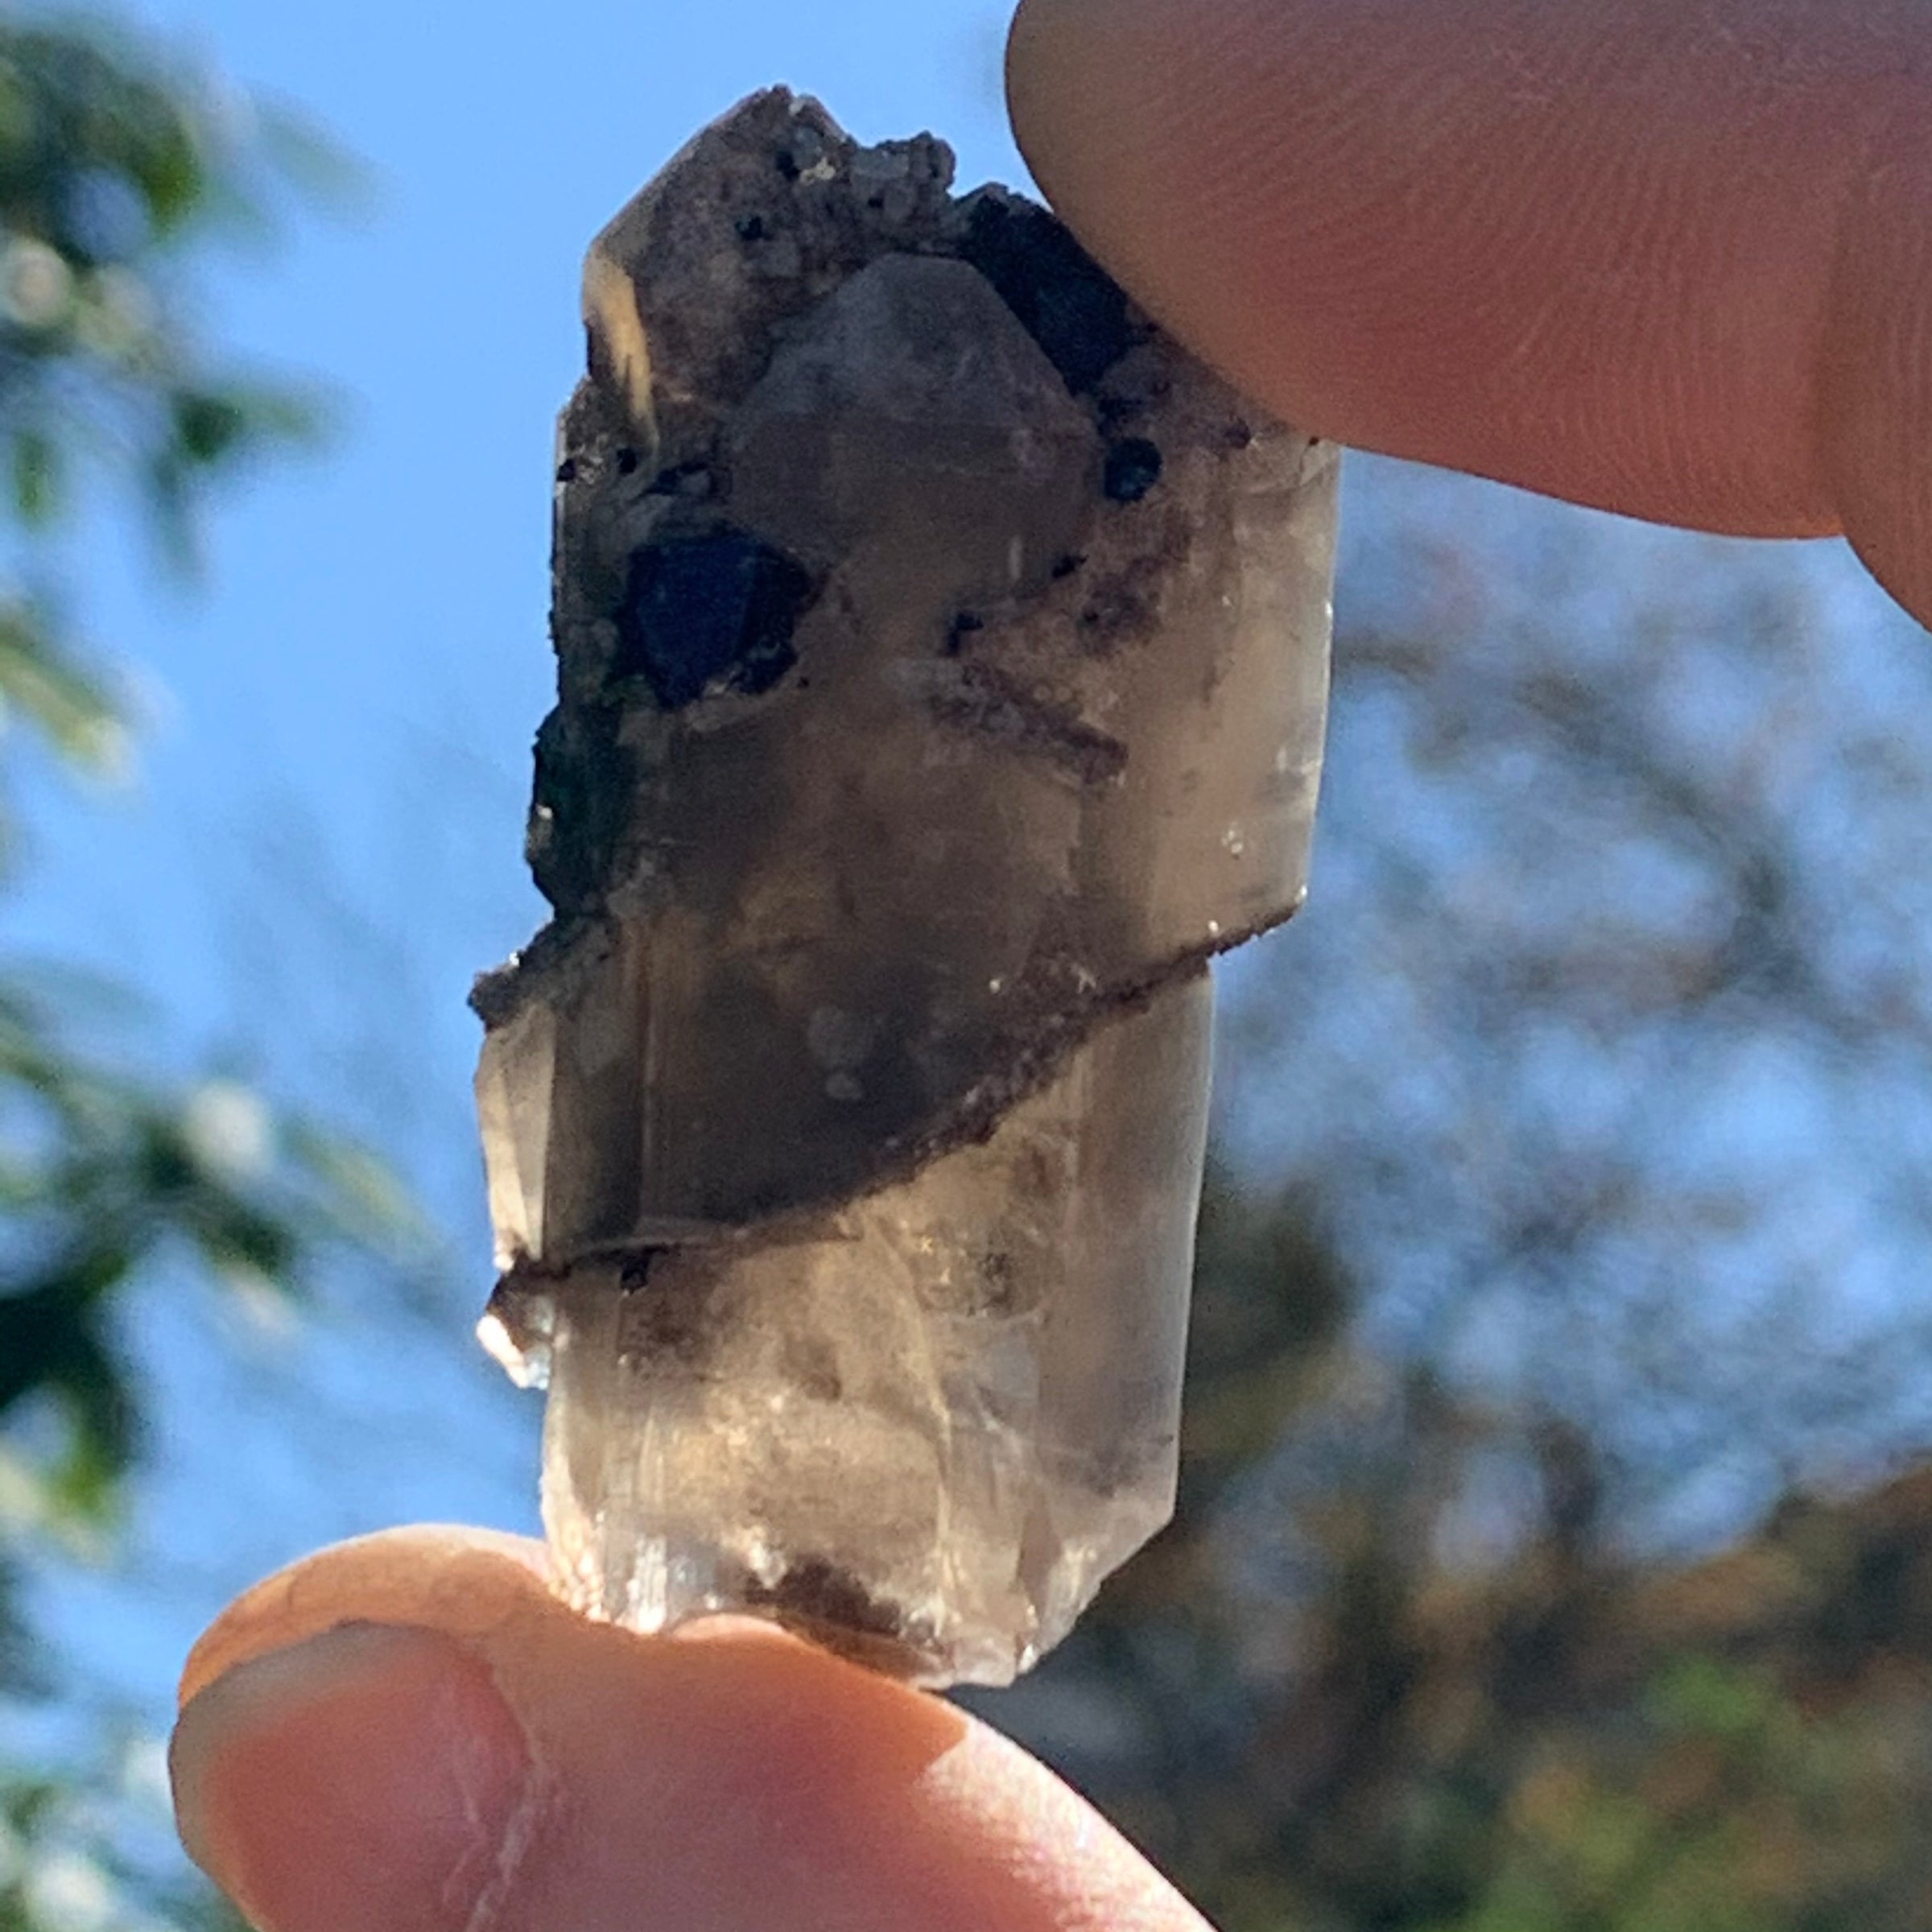 medium and tiny brookite crystals on a triple pointed smokey quartz held in hand up to the sky